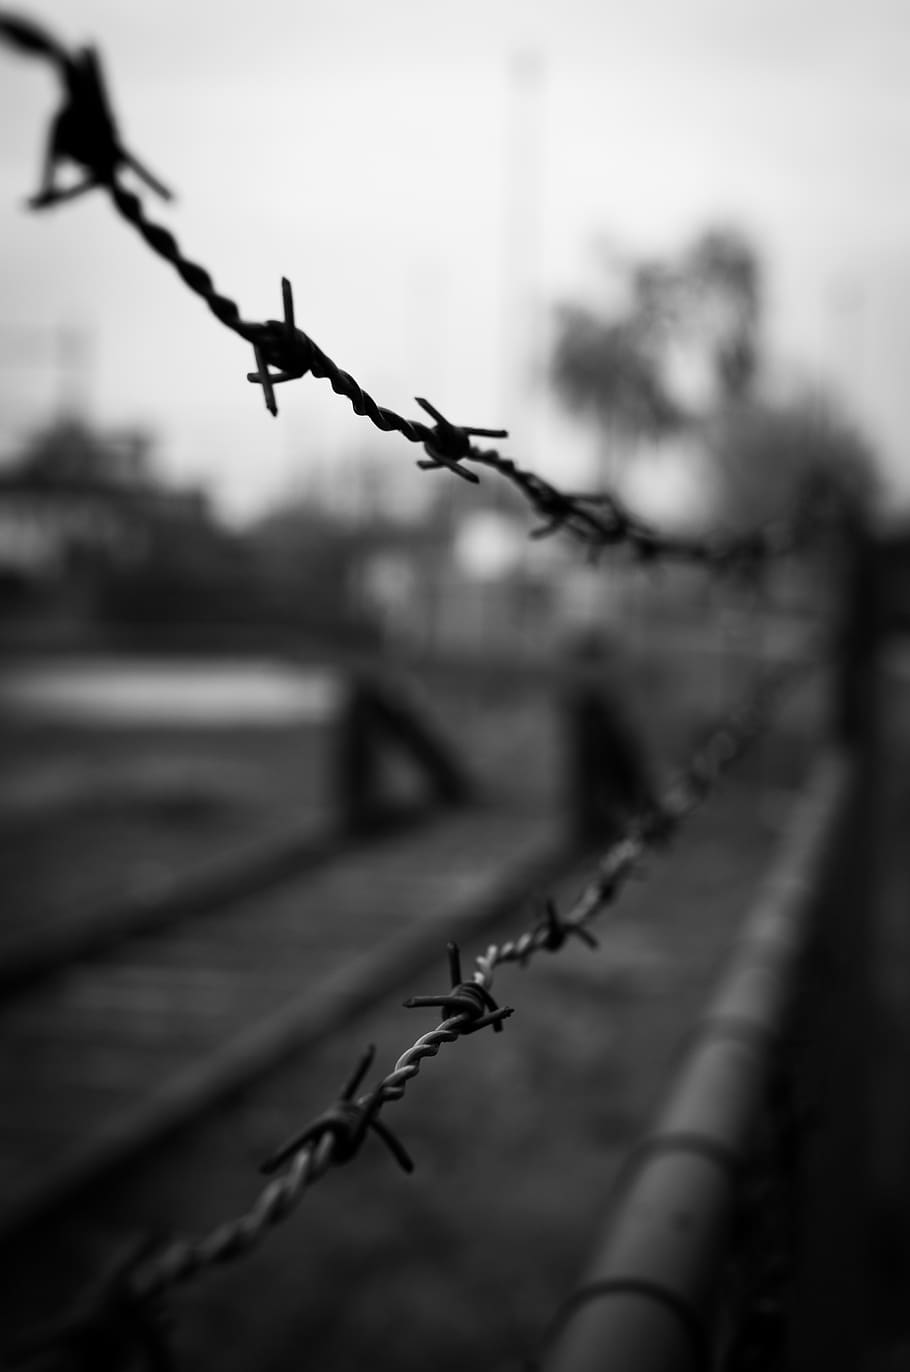 barbed wire, barb wire, black and white, fence, boundary, barrier, safety, wire, protection, security